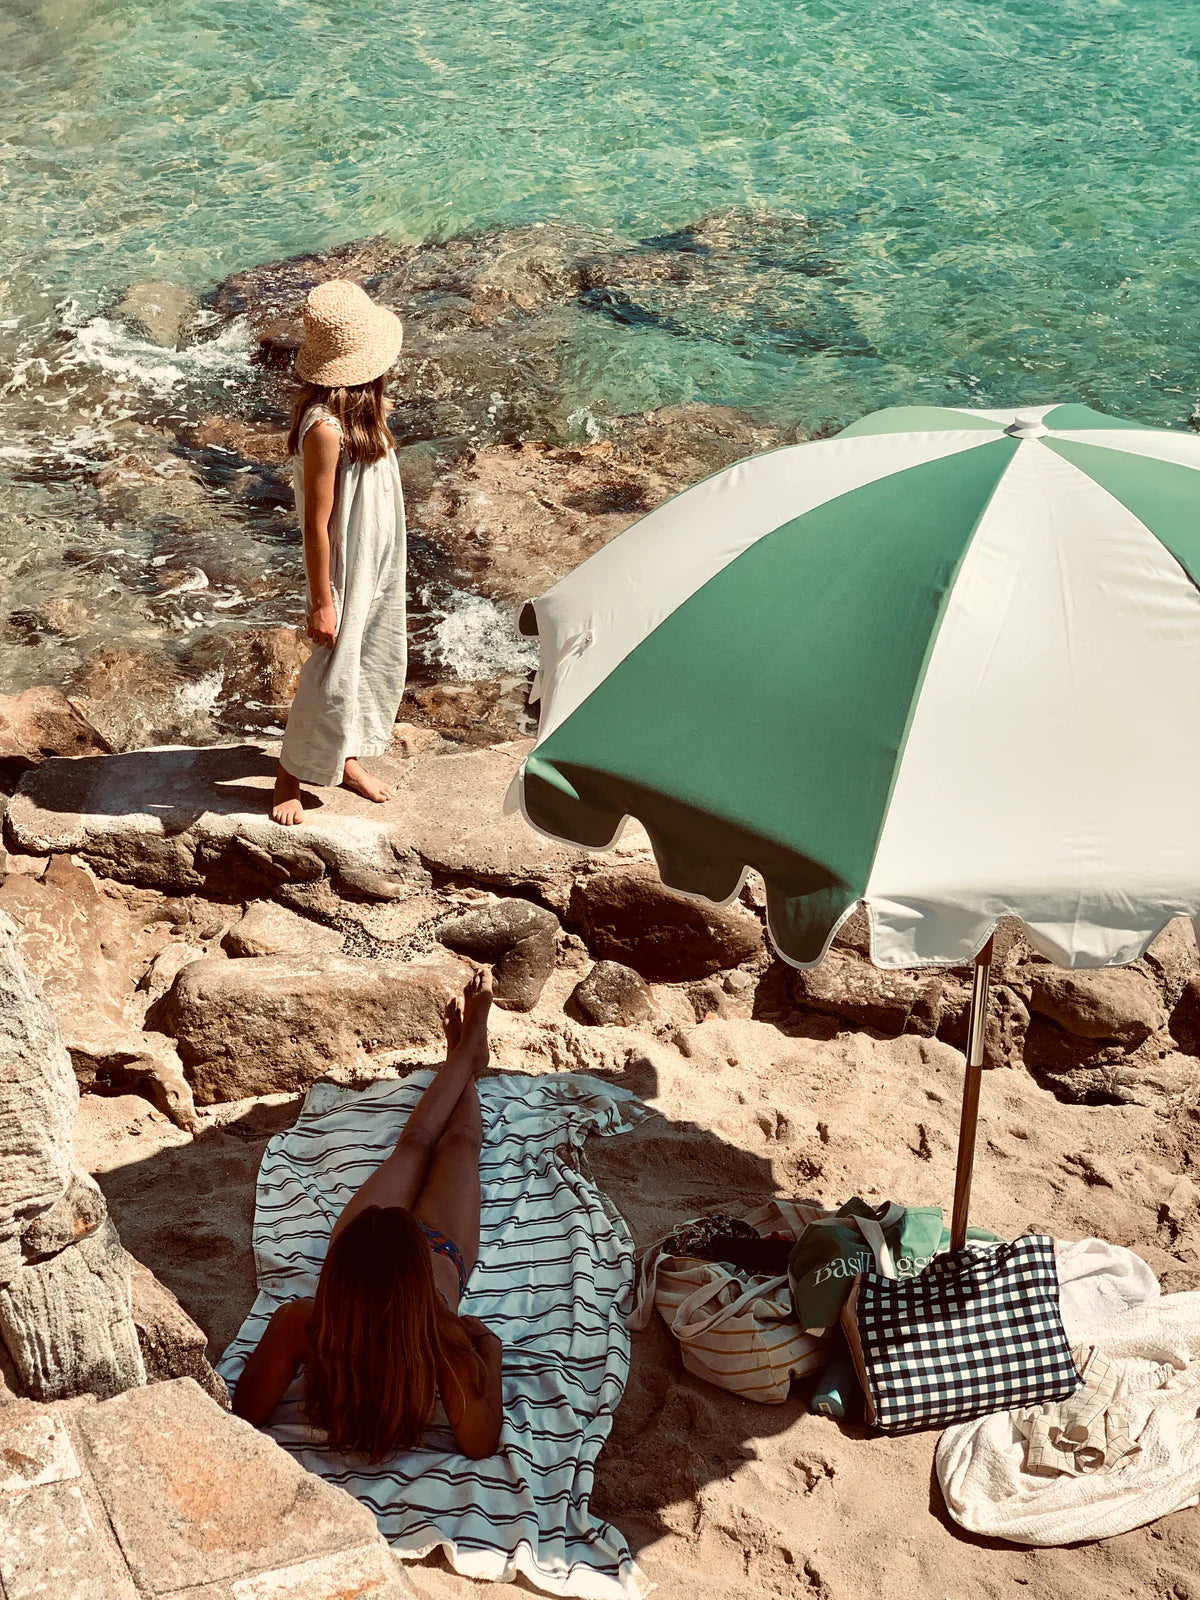 Browse our selection of premium beach umbrellas, crafted to enhance your seaside experience across the United States, from Florida's radiant beaches to California's scenic coasts.